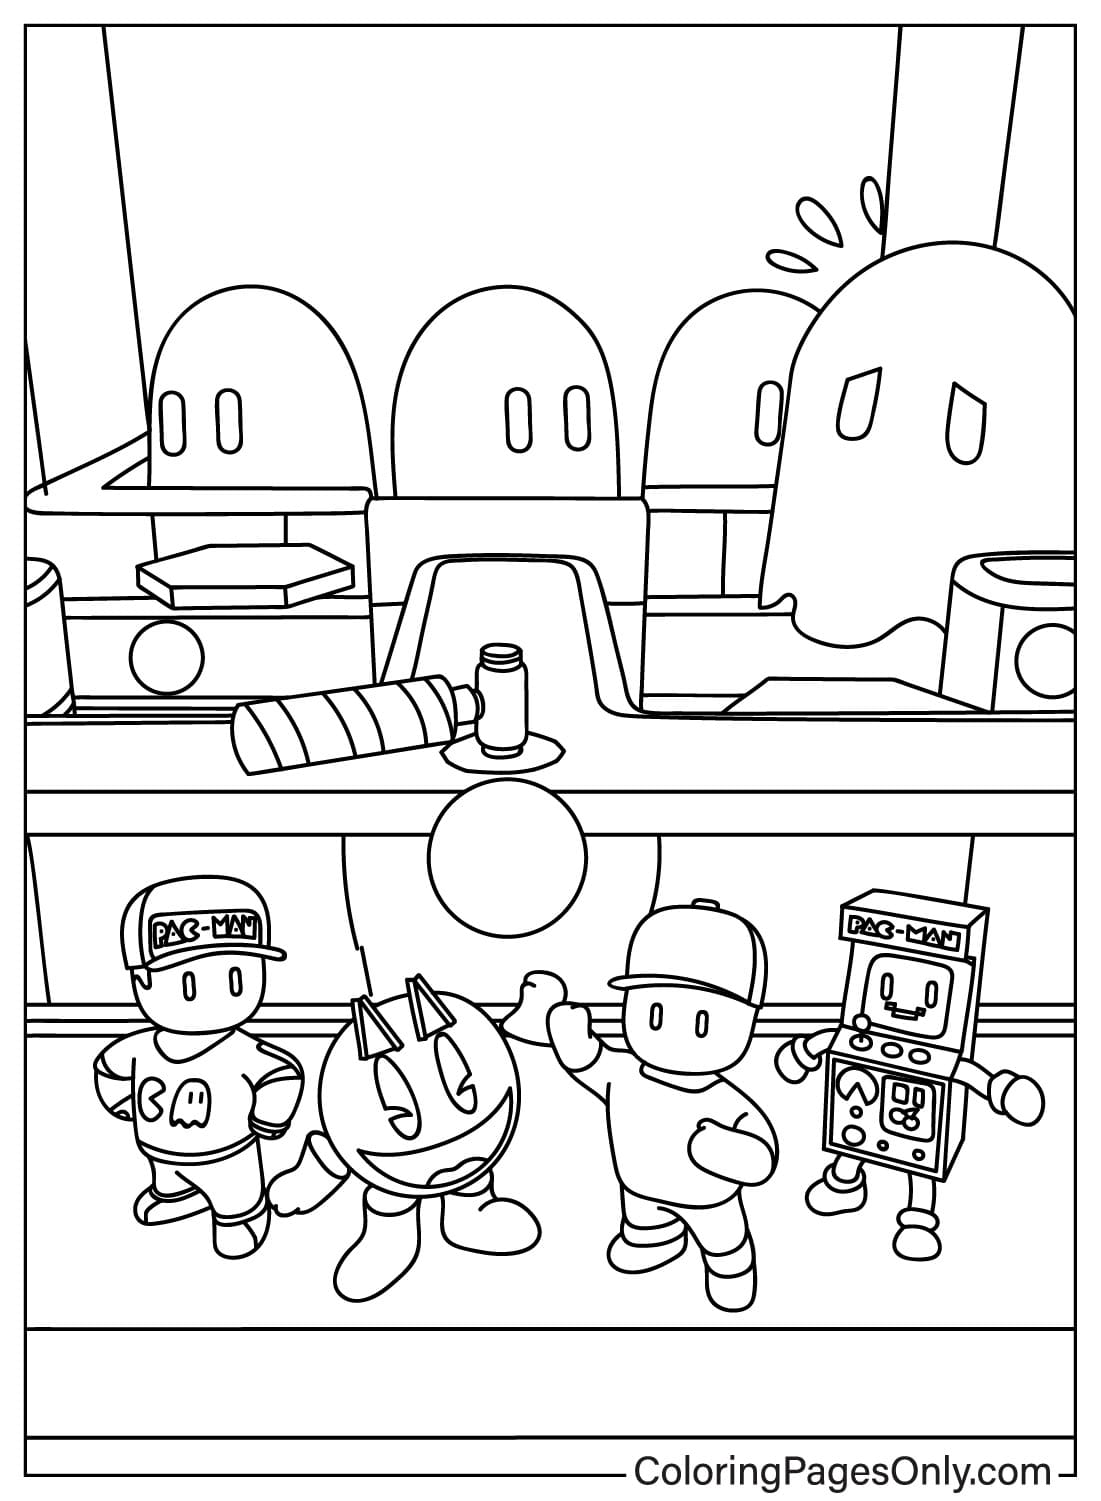 Stumble Guys Free Printable Coloring Page from Stumble Guys